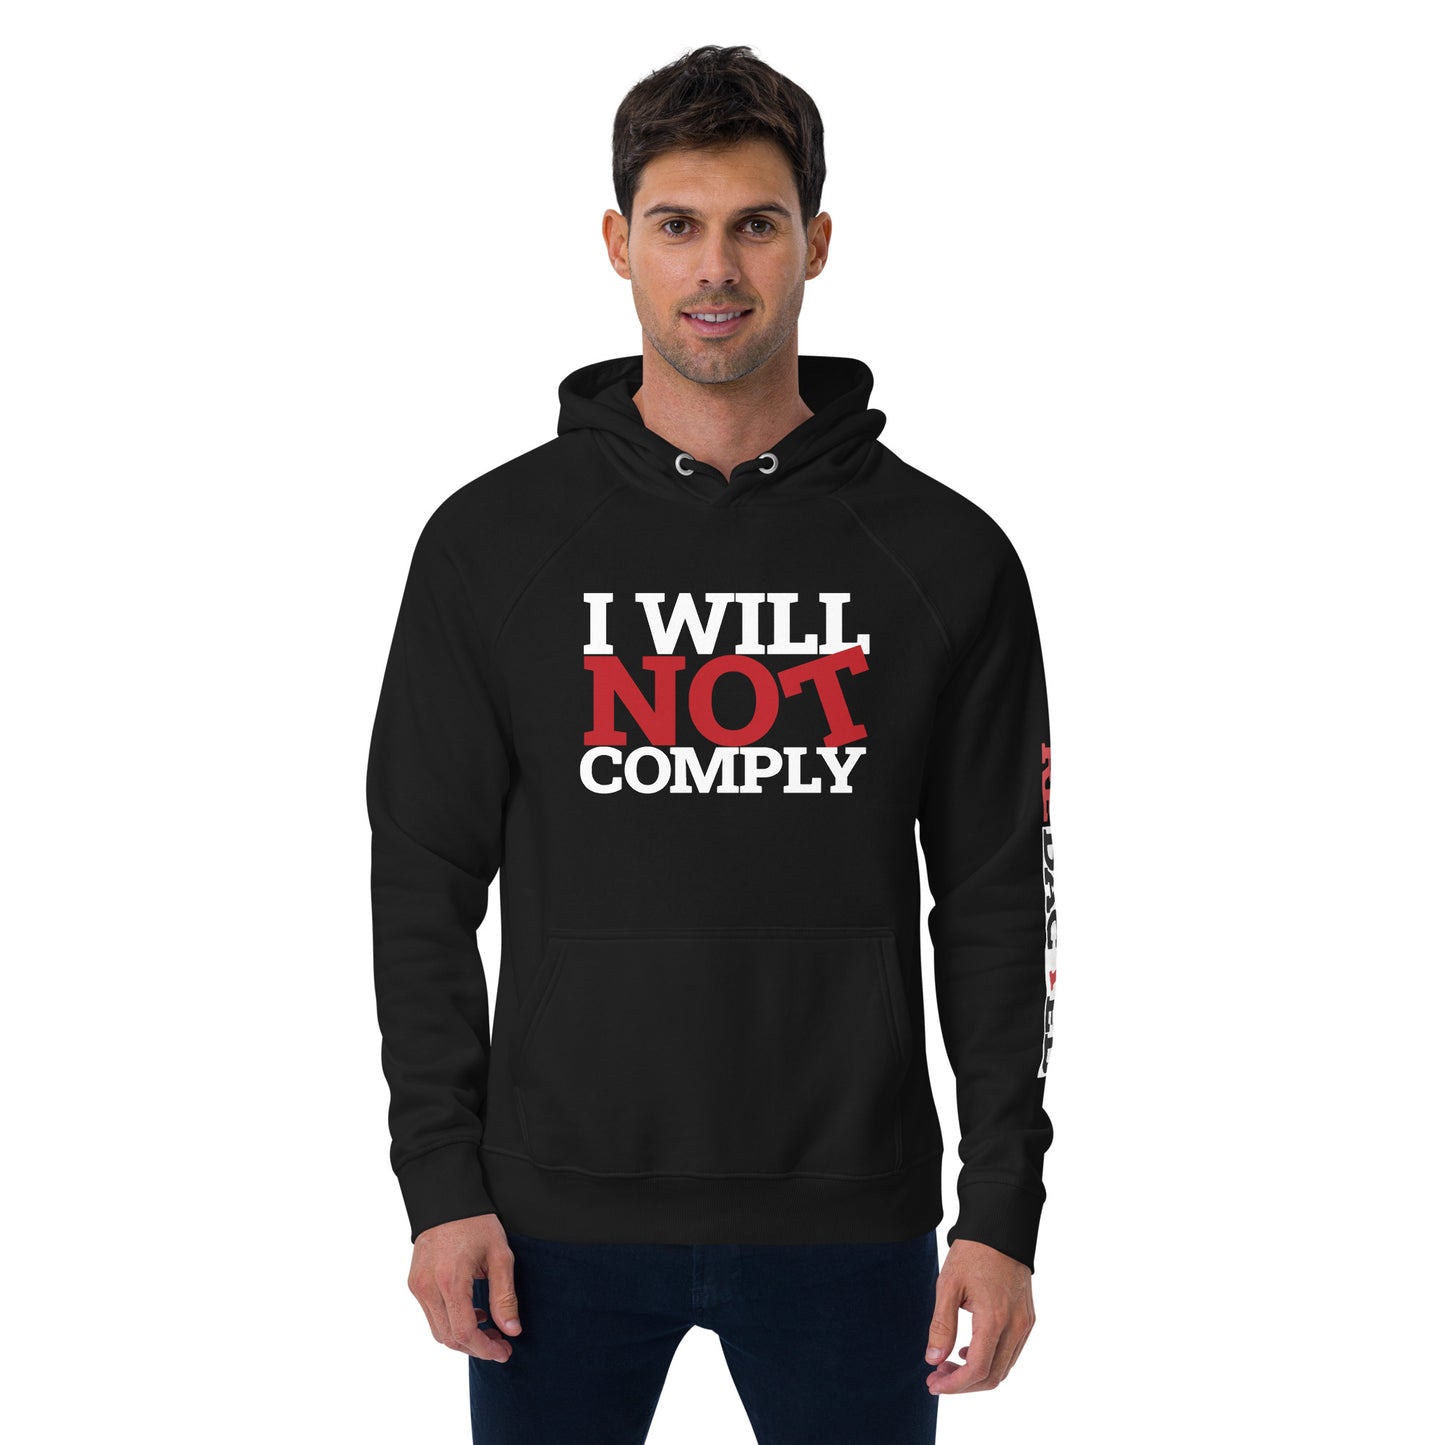 I WILL NOT COMPLY Unisex eco raglan hoodie